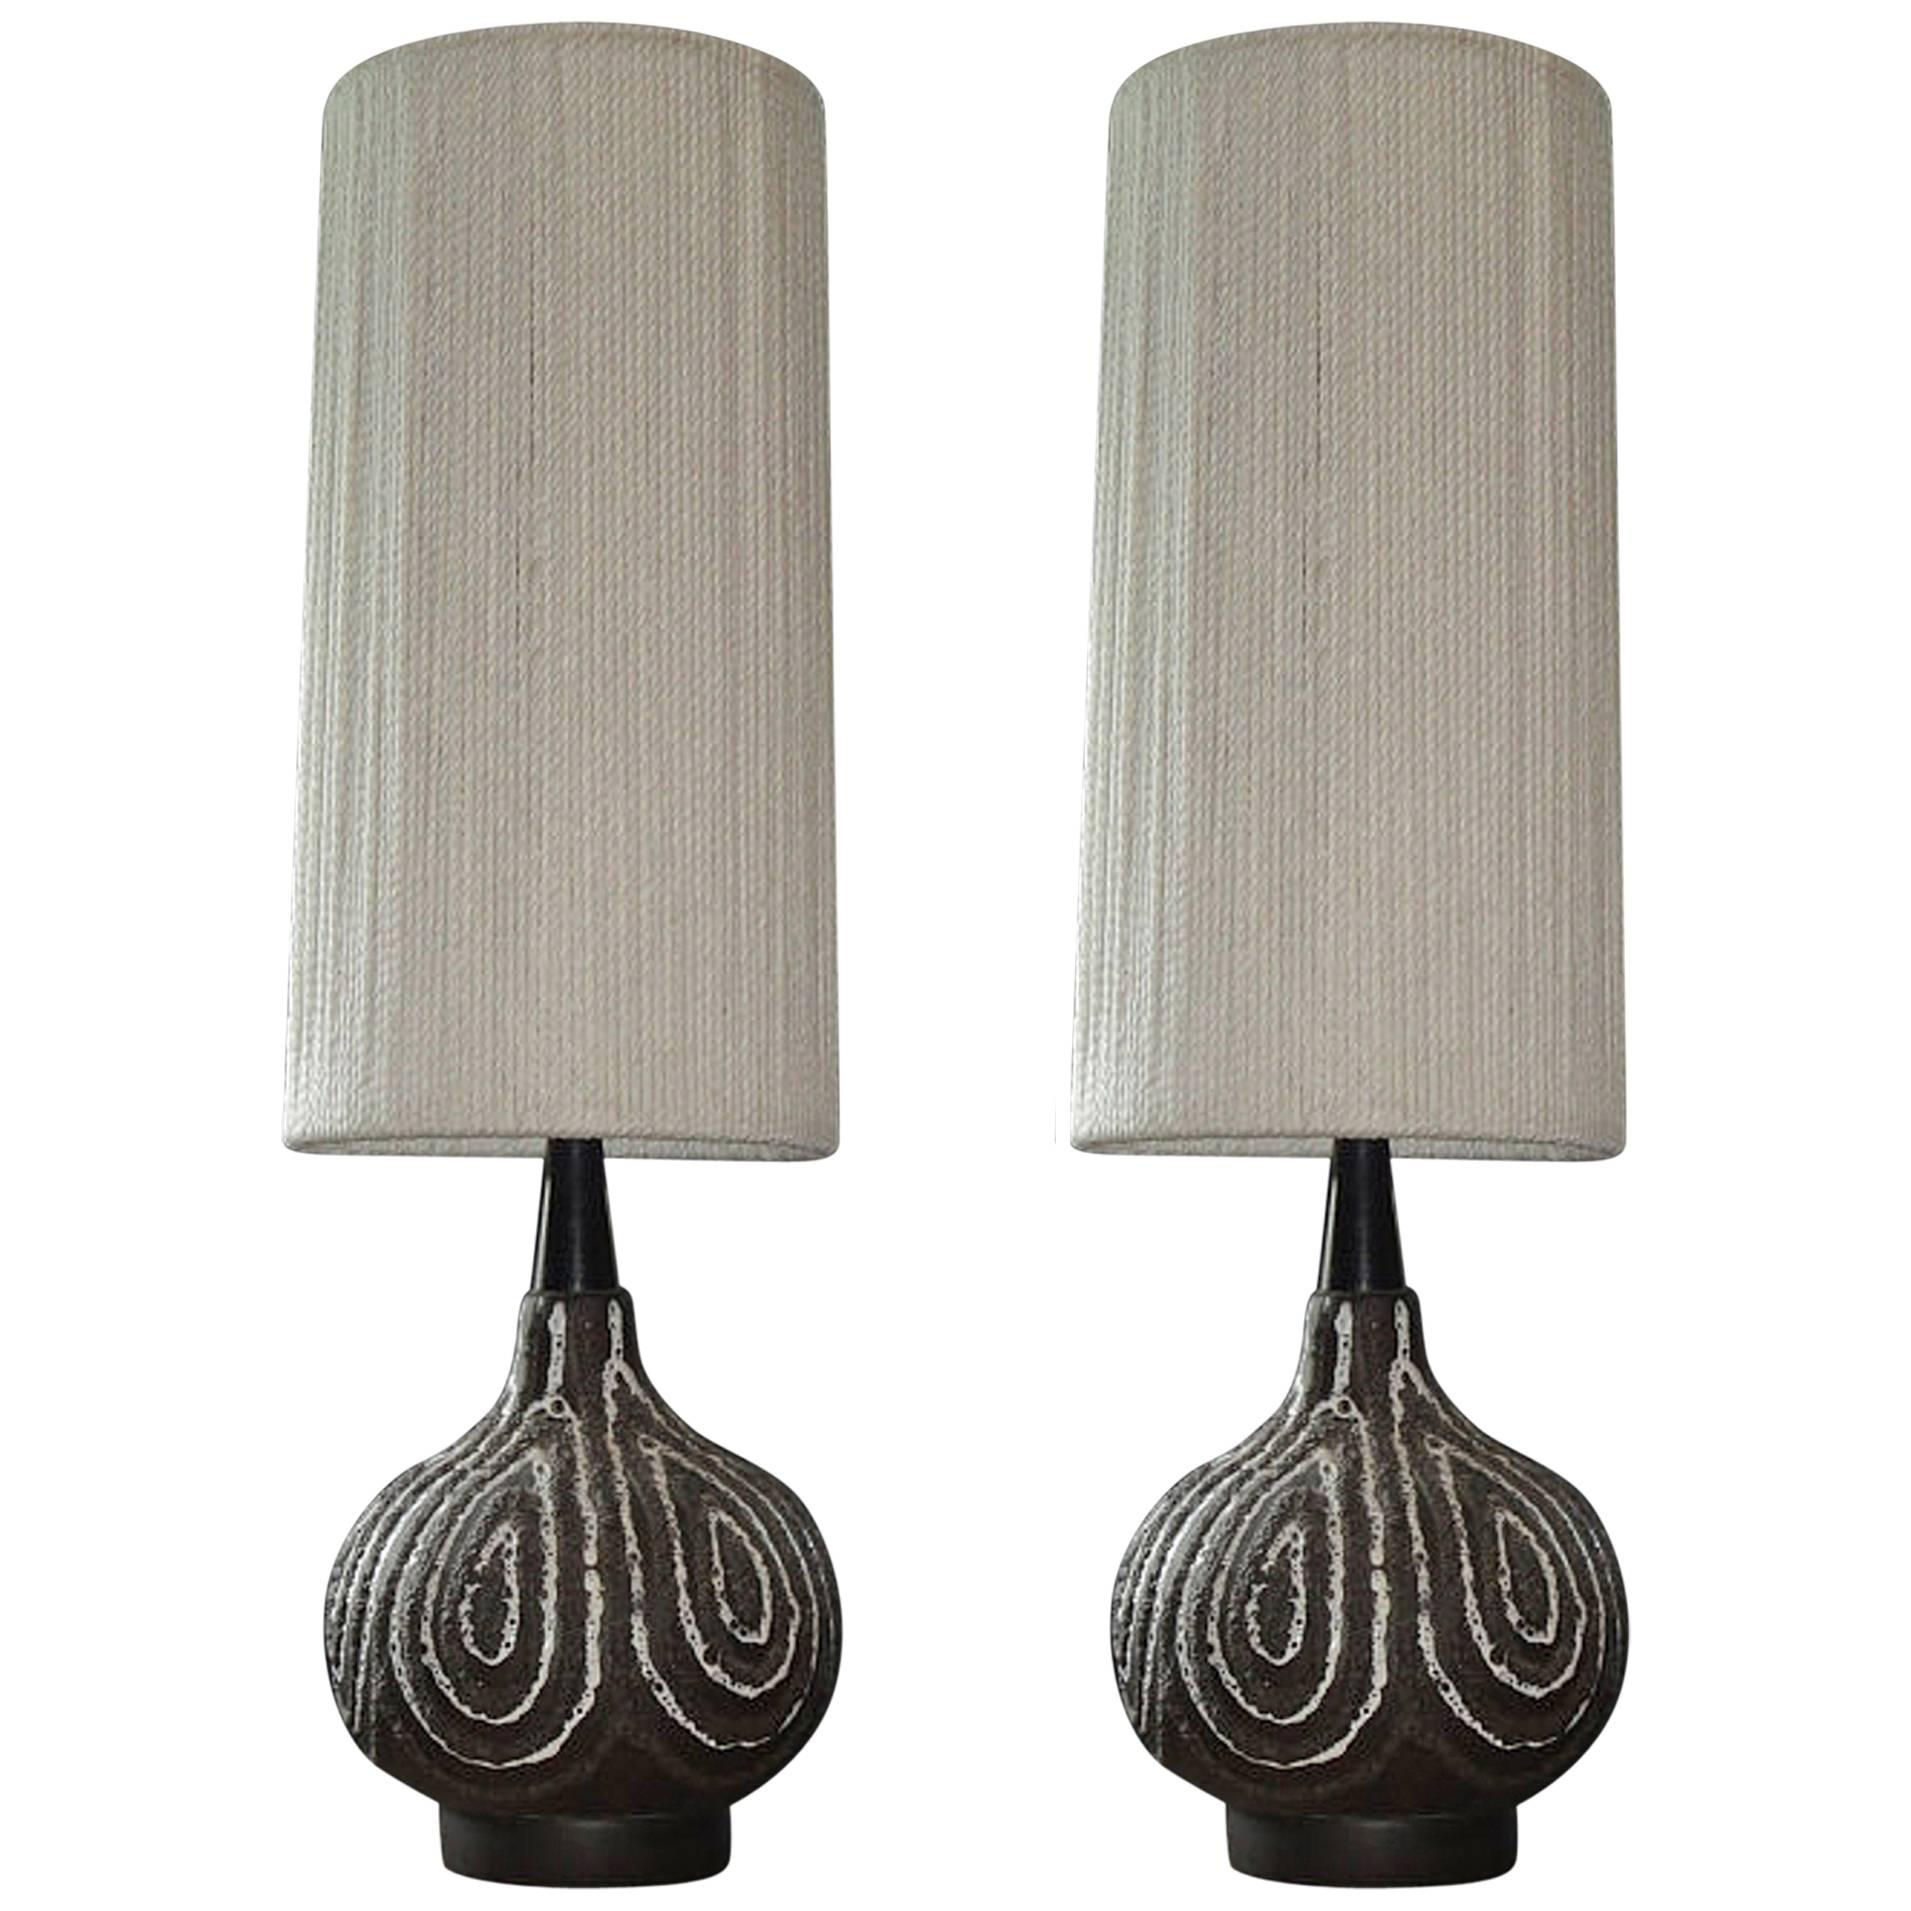 Pair of Vintage Maurice Chalvignac Table Lamps with Original Shades